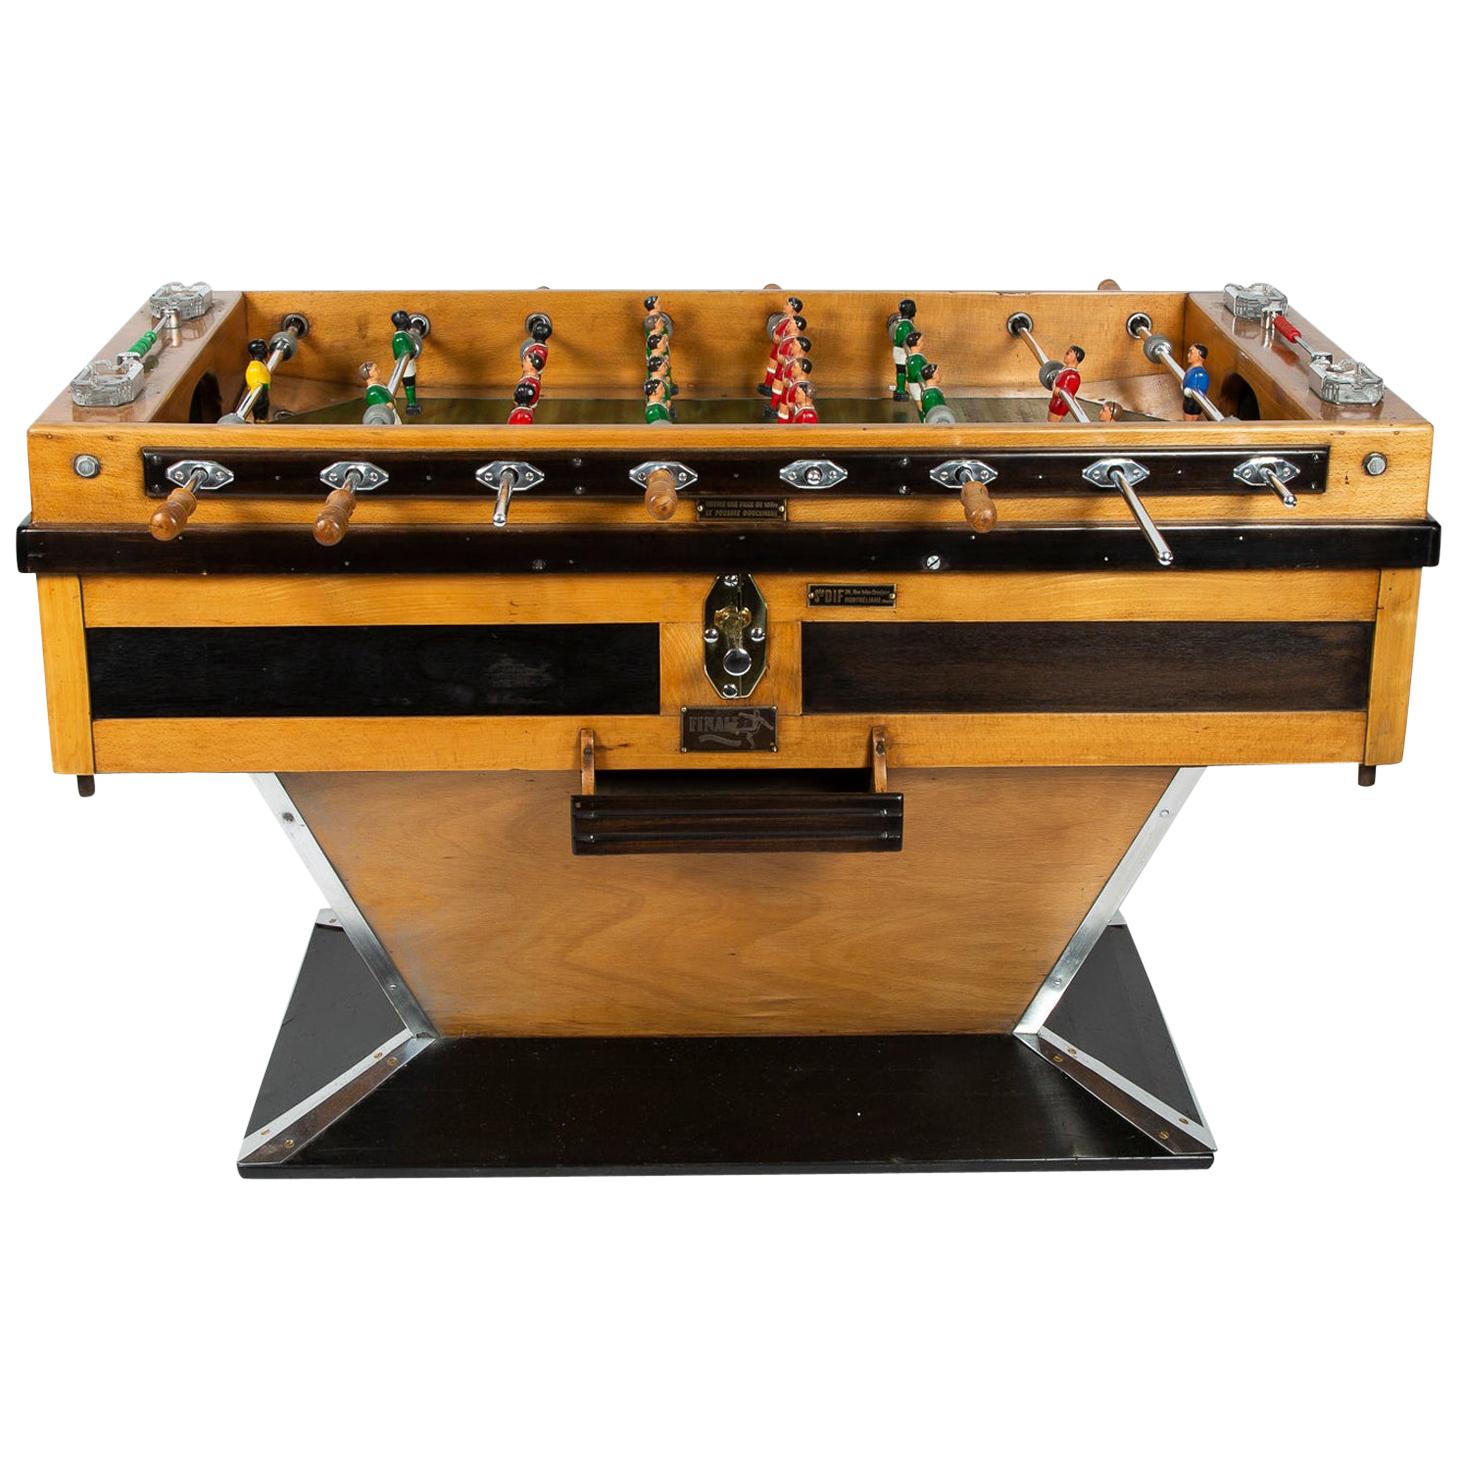 Finale "Babyfoot" Table Football, Montbeliard, France, circa 1950